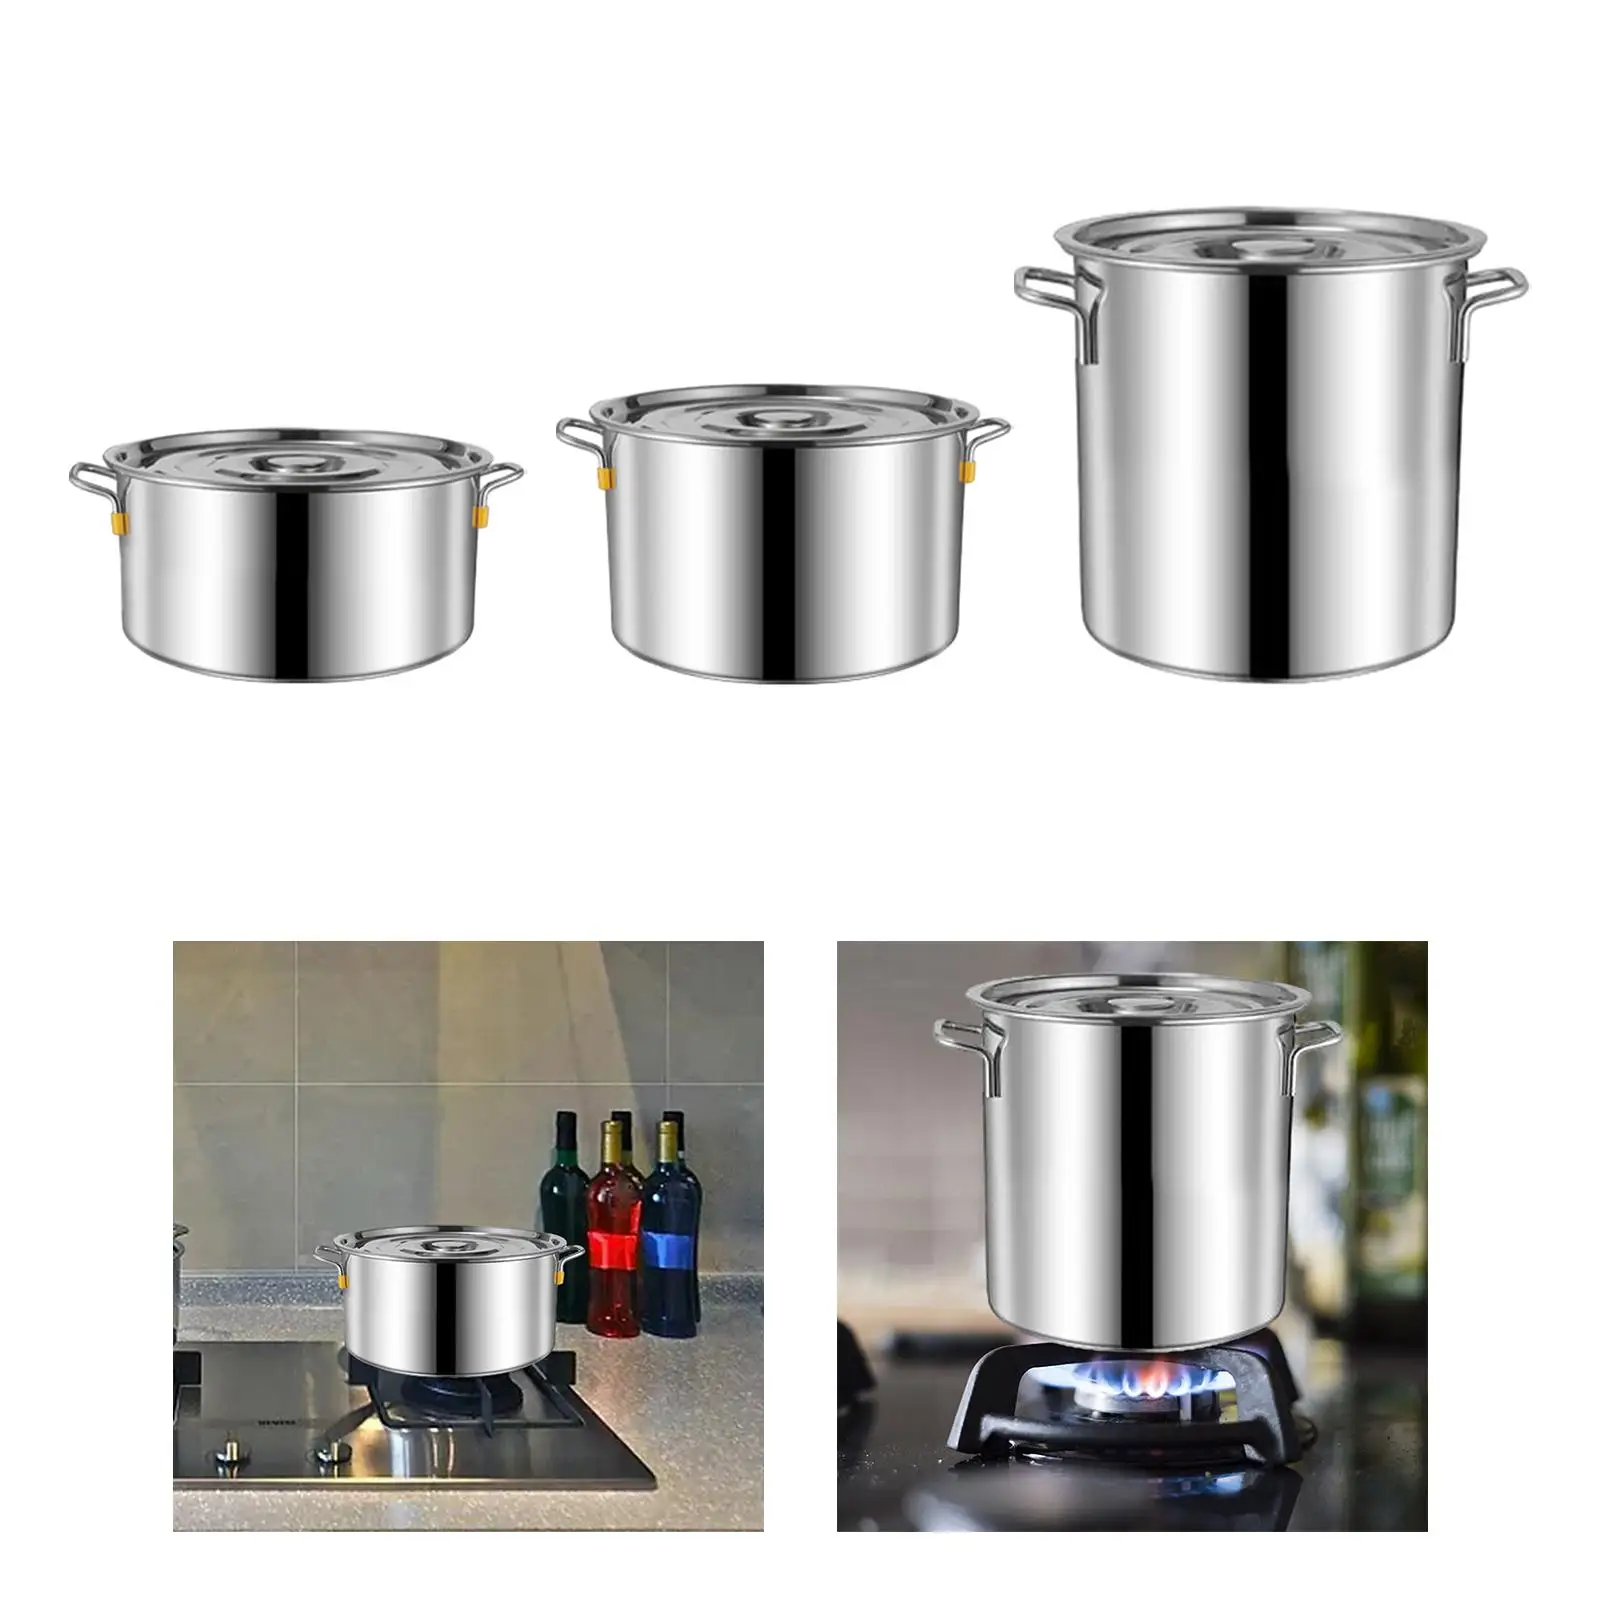 Stainless steel soup pot, composite bottom pot, suitable for all stoves